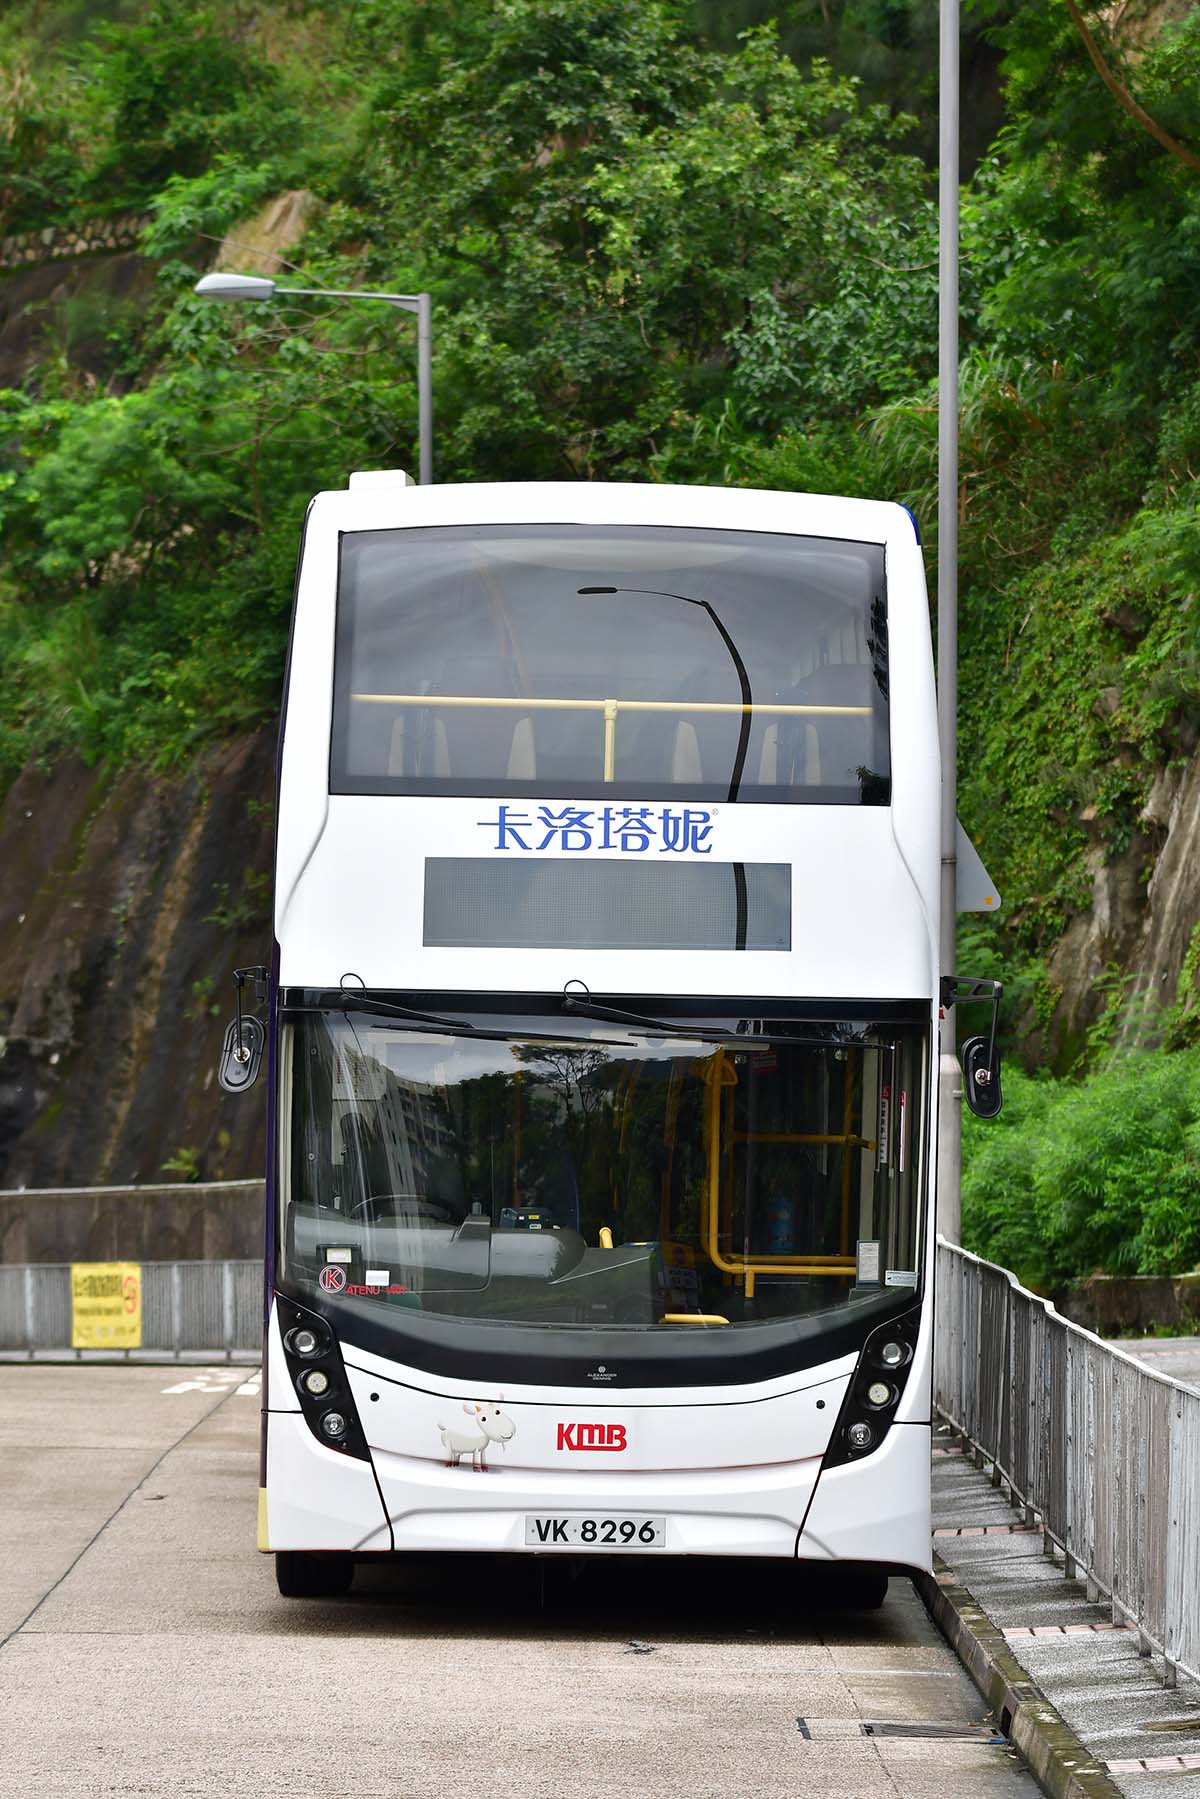 photograph of the front of a double decker bus